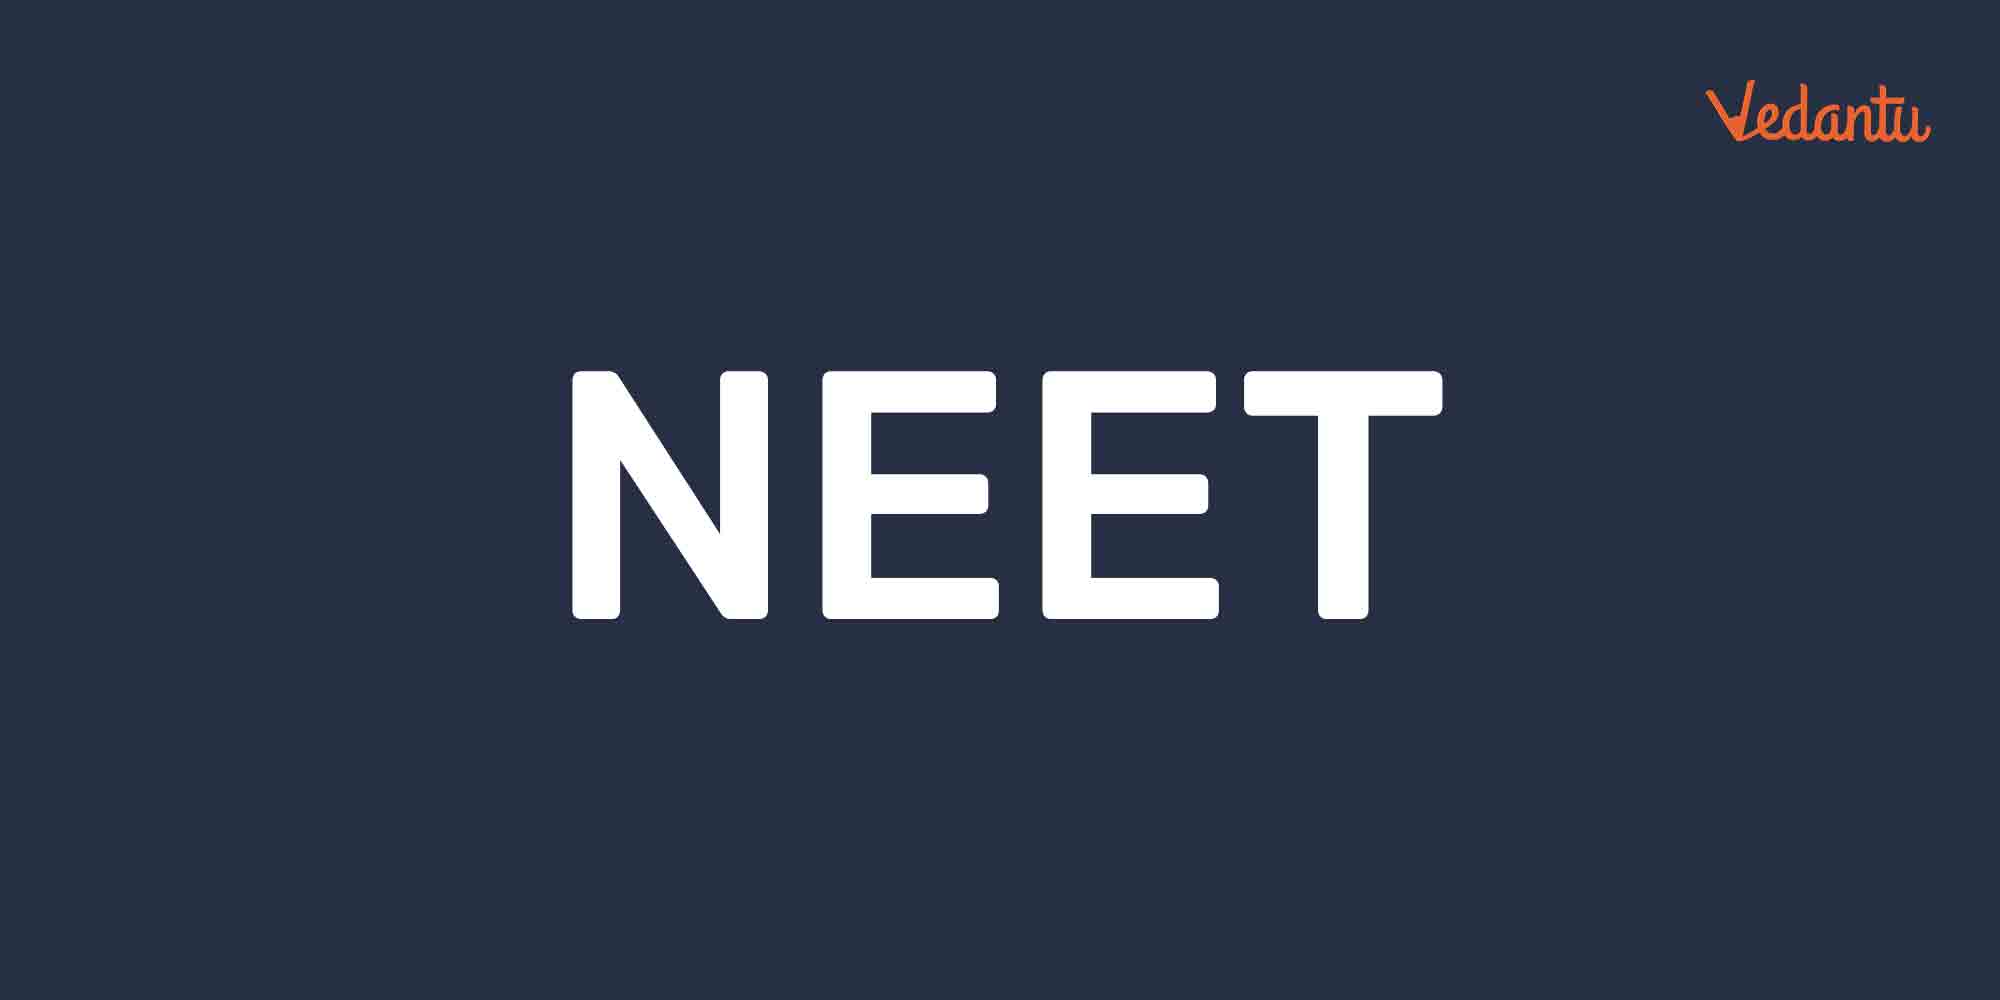 7 Ways To Deal With Stress and Anxiety During NEET Exam Preparation